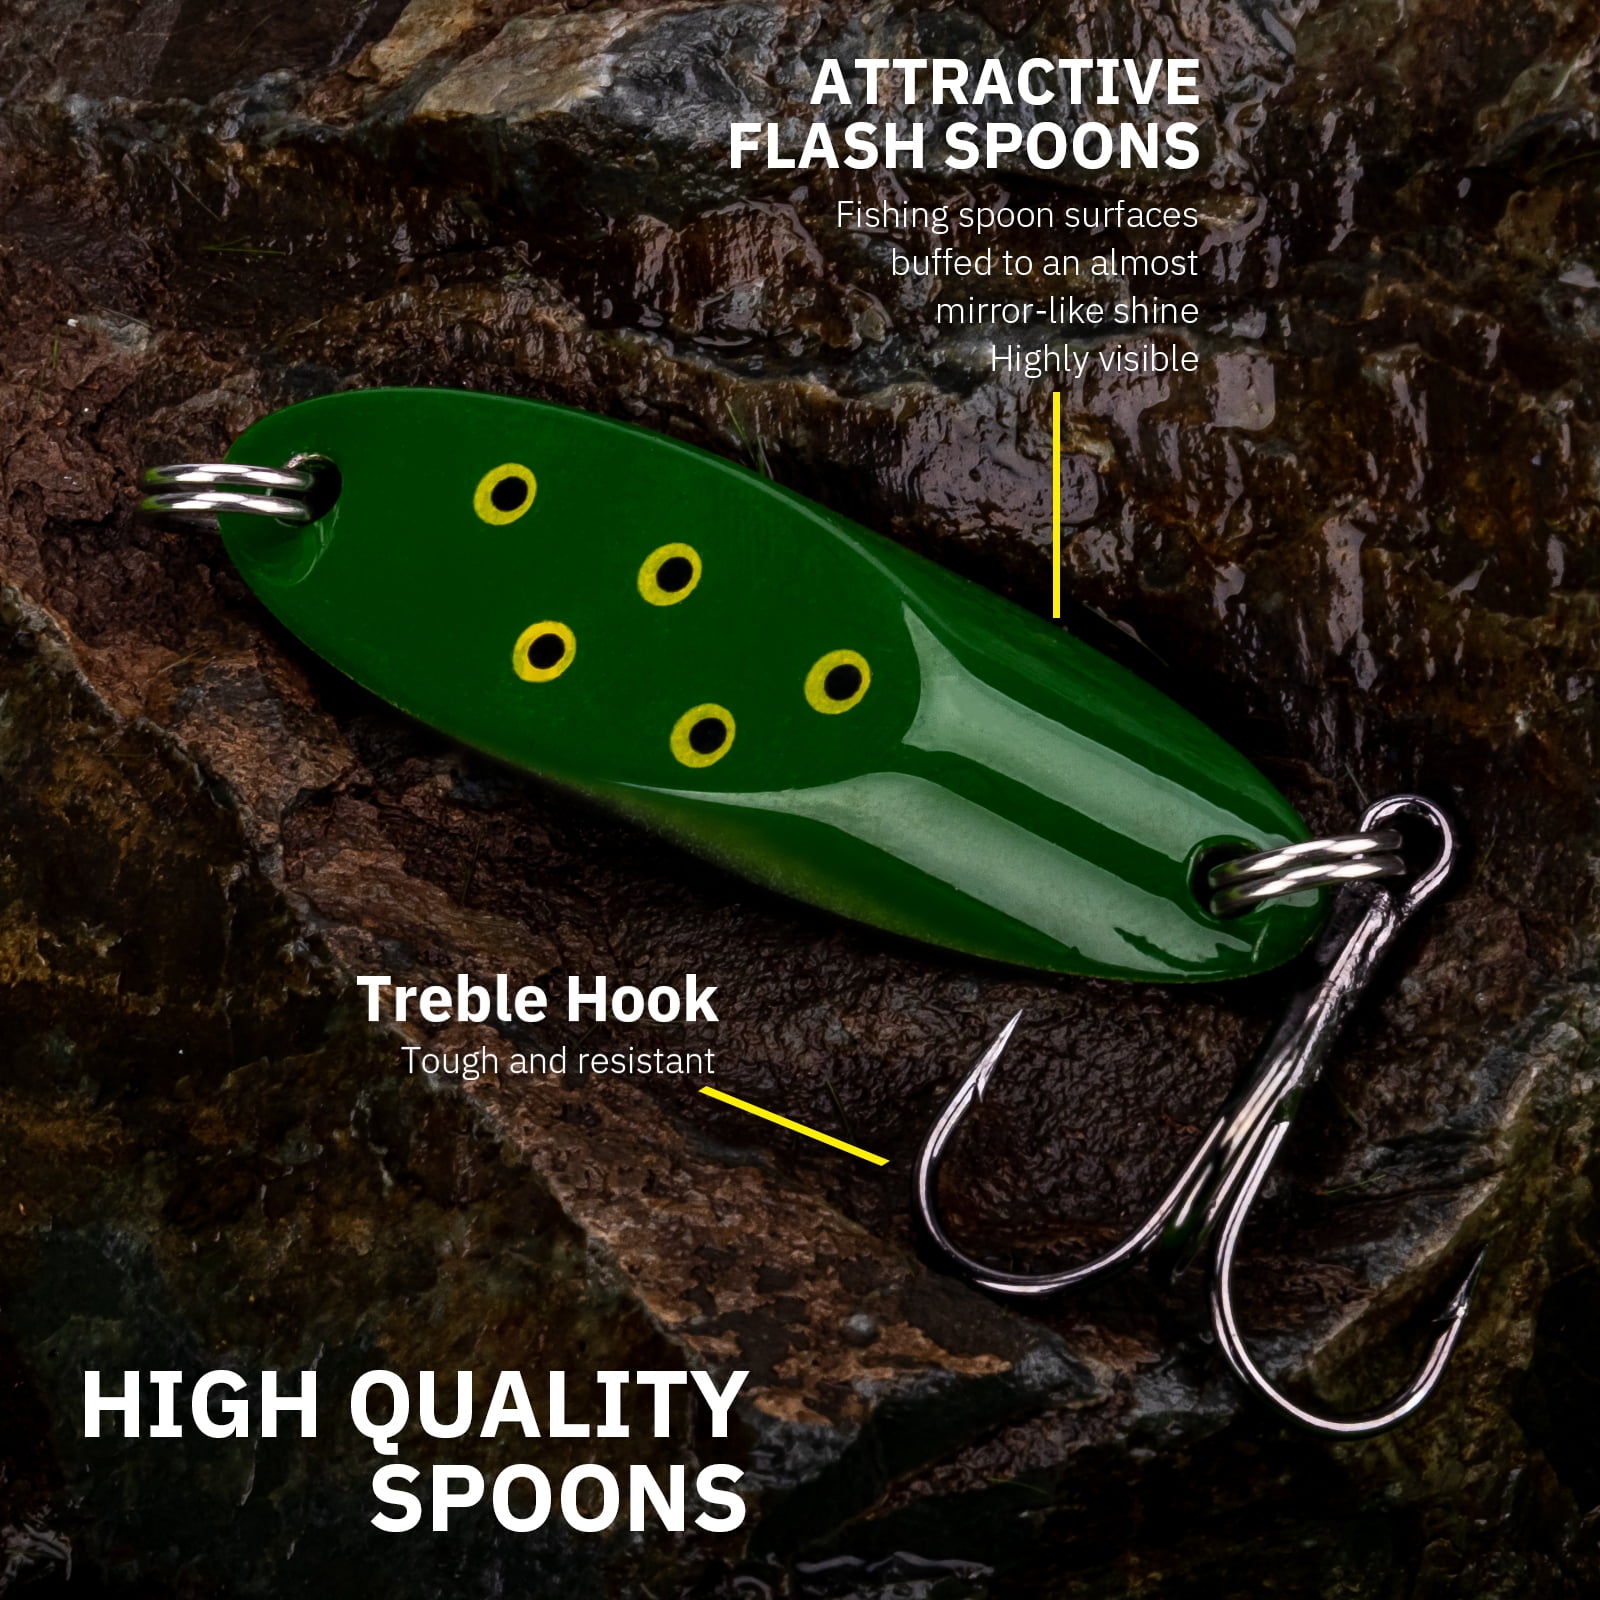 THKFISH Fishing Lures Trout Lures Fishing Spoons Lures for Trout Pike Bass  Crappie Walleye Color C 1/2oz 5pcs 